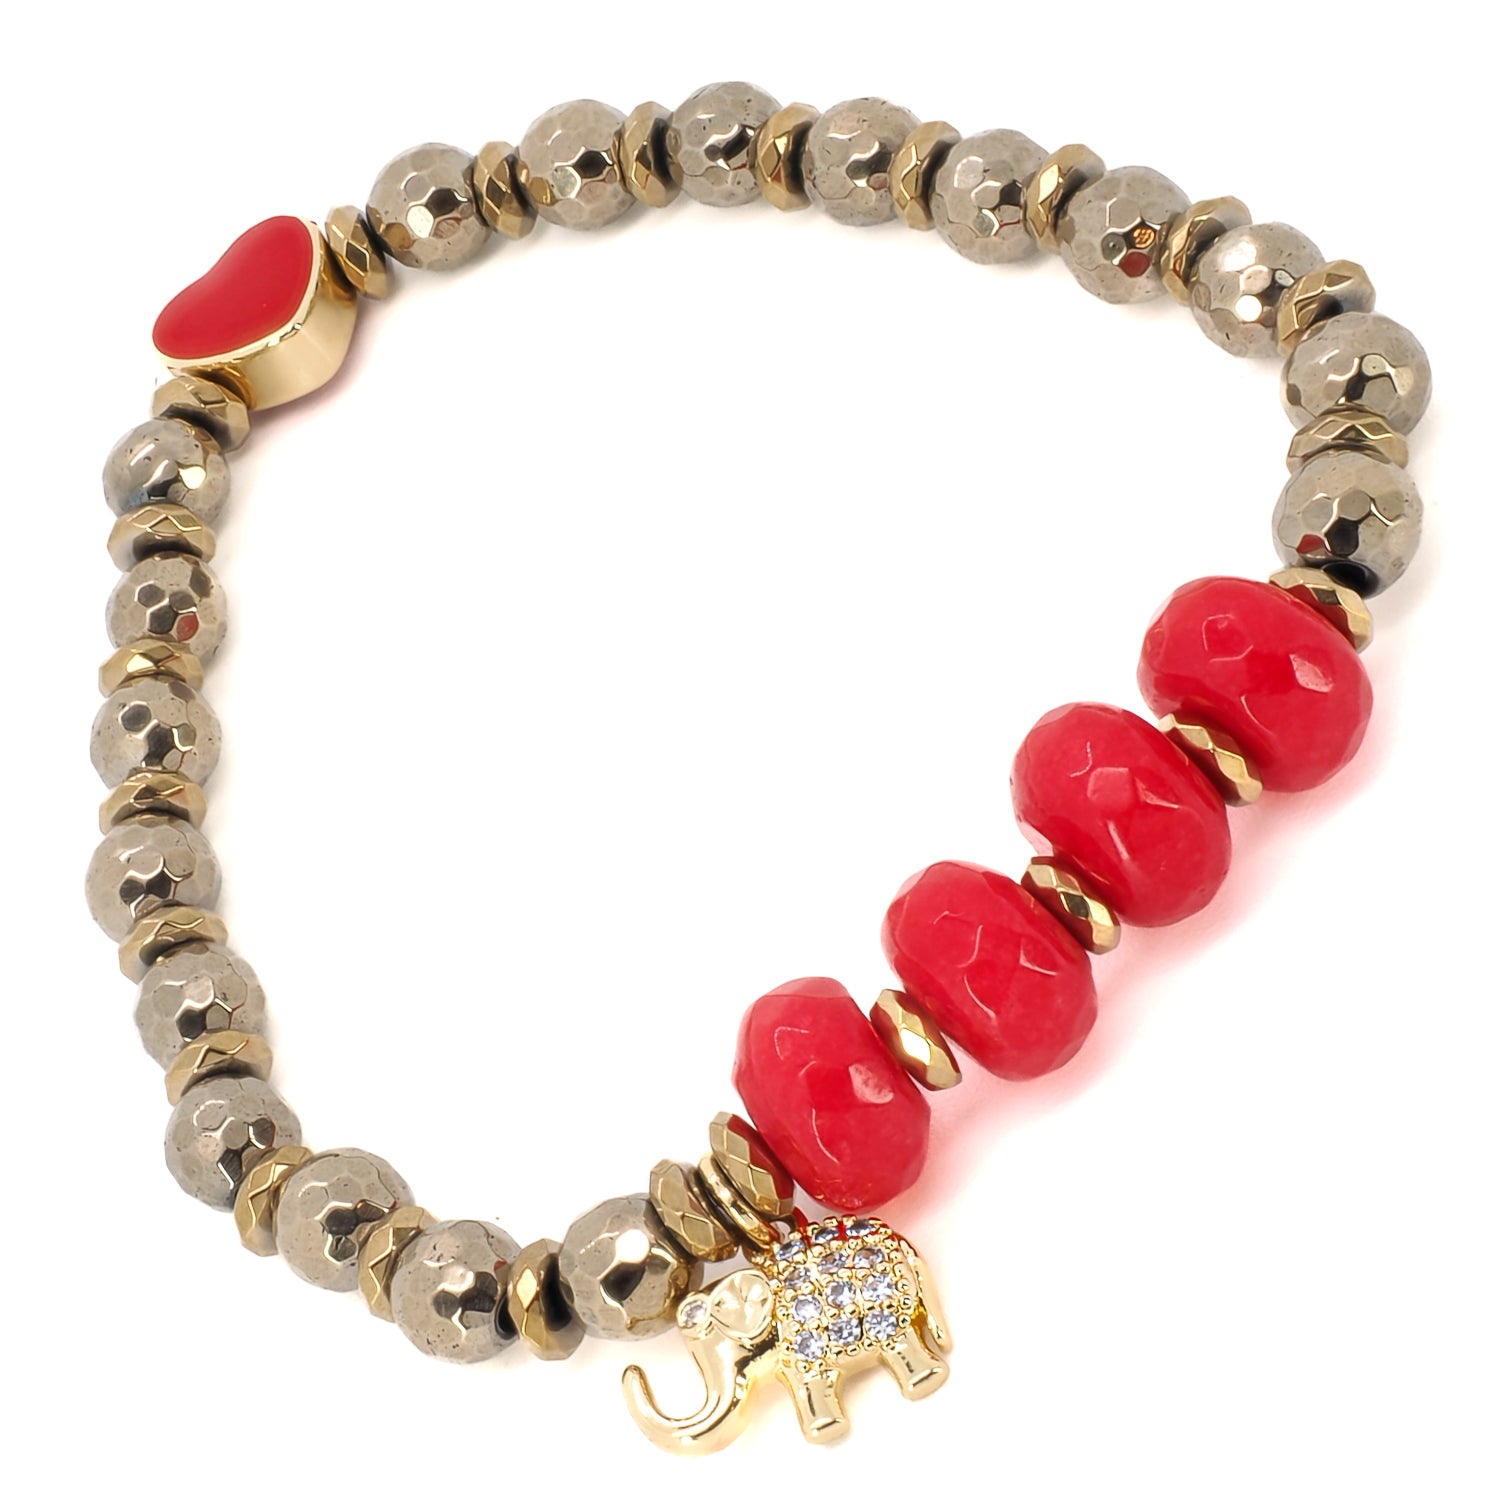 Find balance and grounding with the Red Heart Lucky Elephant Bracelet, a handmade accessory that combines hematite stone beads and a symbolic Lucky Elephant charm.